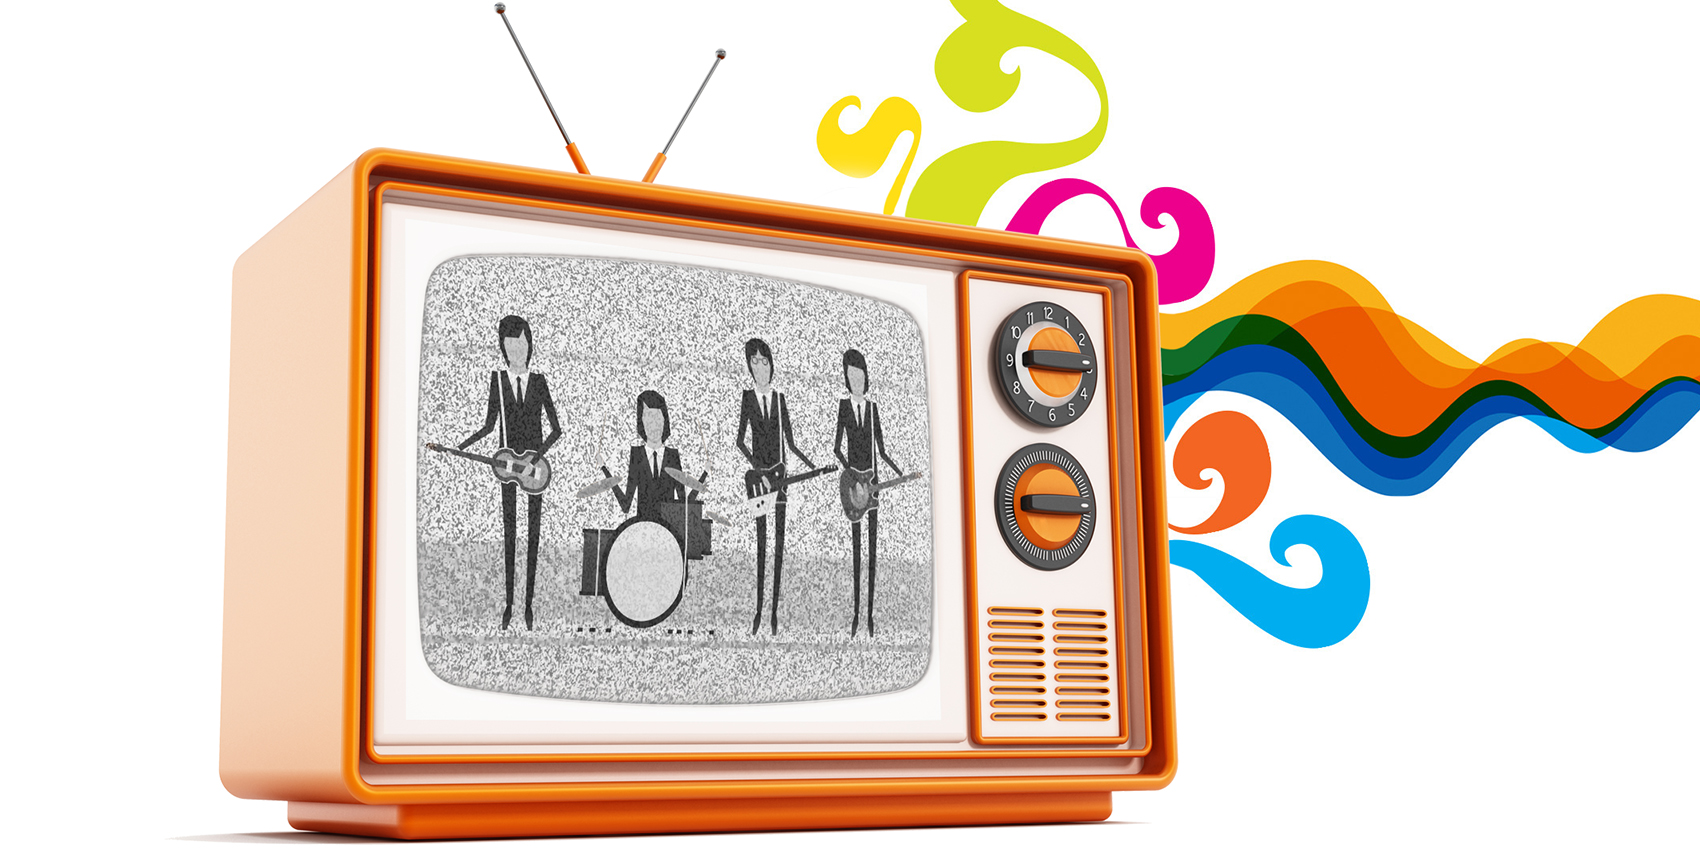 illustration of the beatles on a television